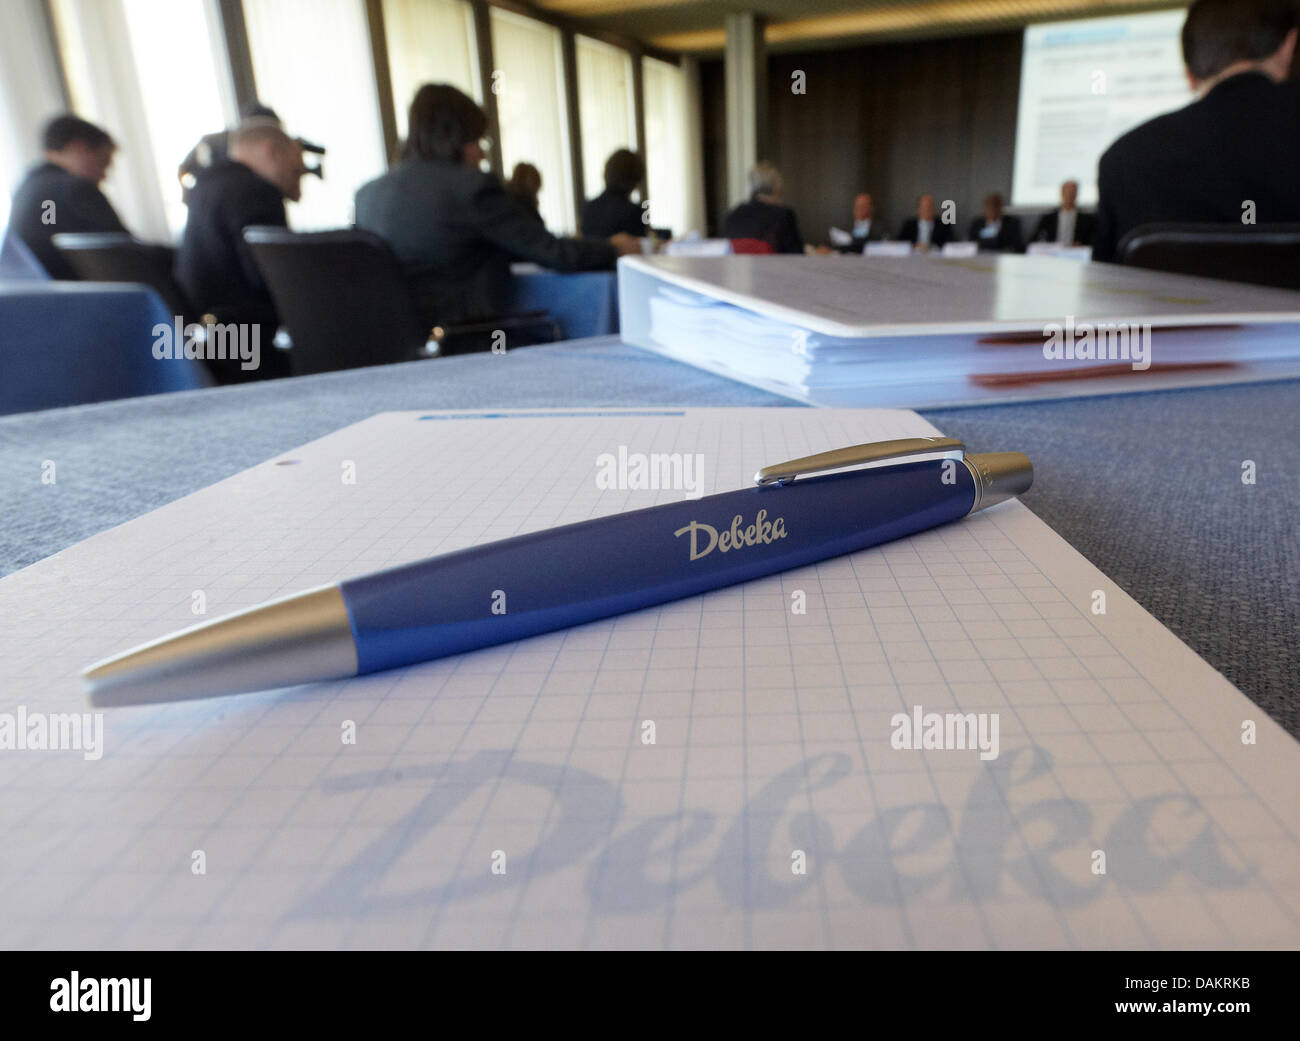 A pen and paper with the Debeka logo are pictured during the balance press conference of the ensurance company Debeka in Koblenz, Germany, 4 May 2011. Thanks to good trade with private health insurance companies, Debeka group were able to increase their annual turnover to 12 billion Euro which means an increase by 4.2 per cent in comparison to the year before. Photo: Thomas Frey Stock Photo